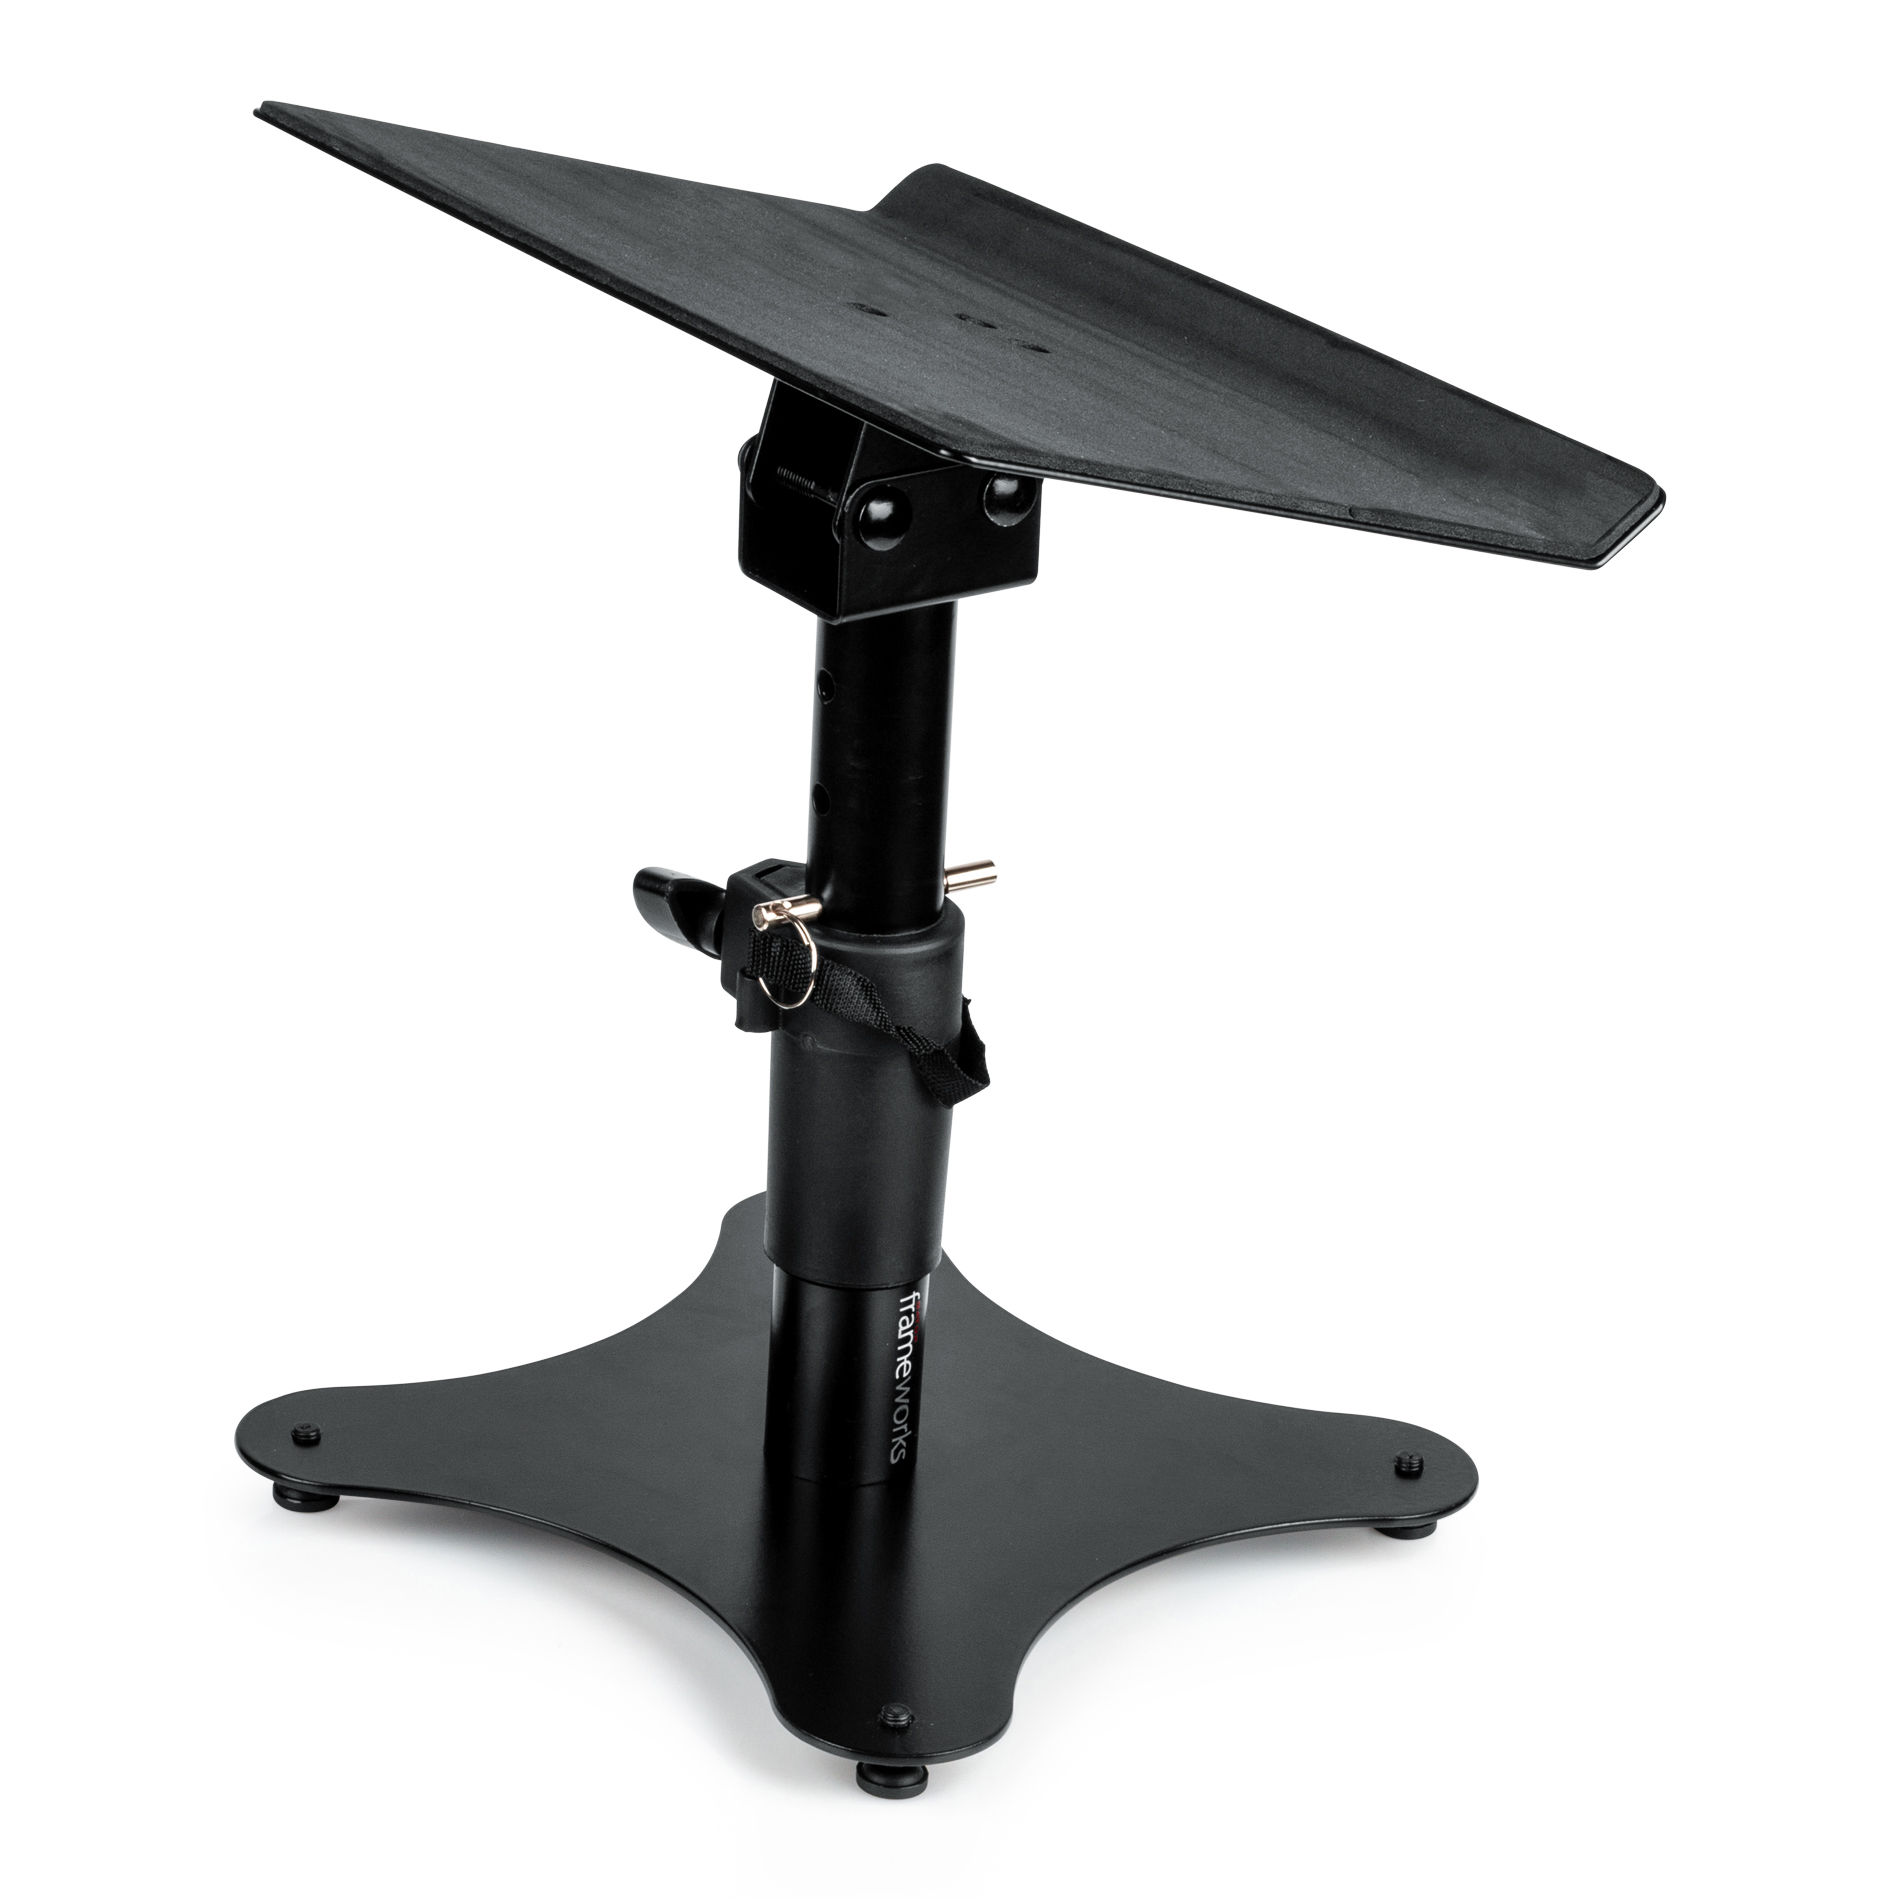 Desktop Laptop And Accessory Stand-GFWLAPTOP2000